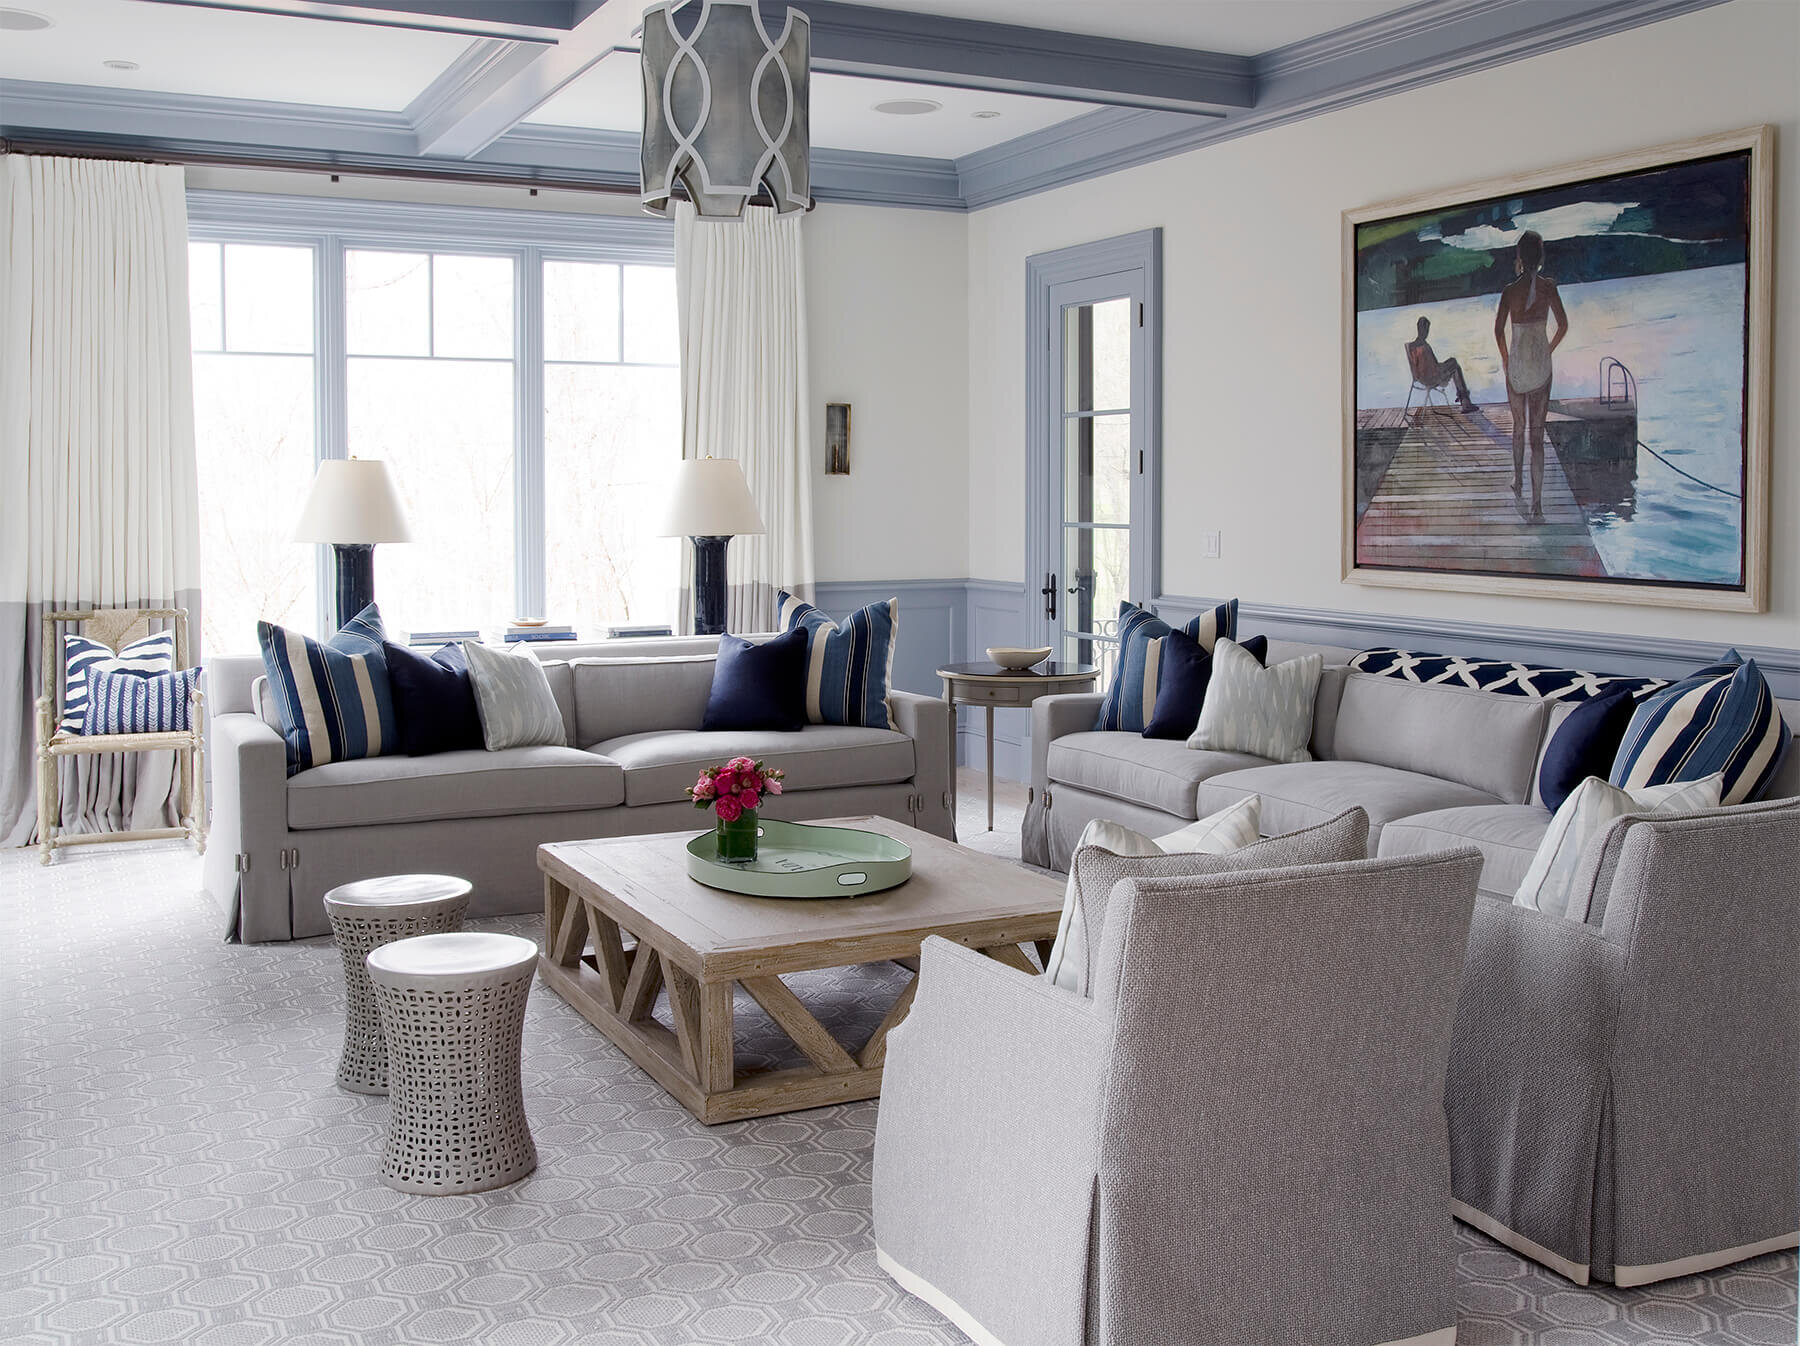 Living room in grays, blues and white.